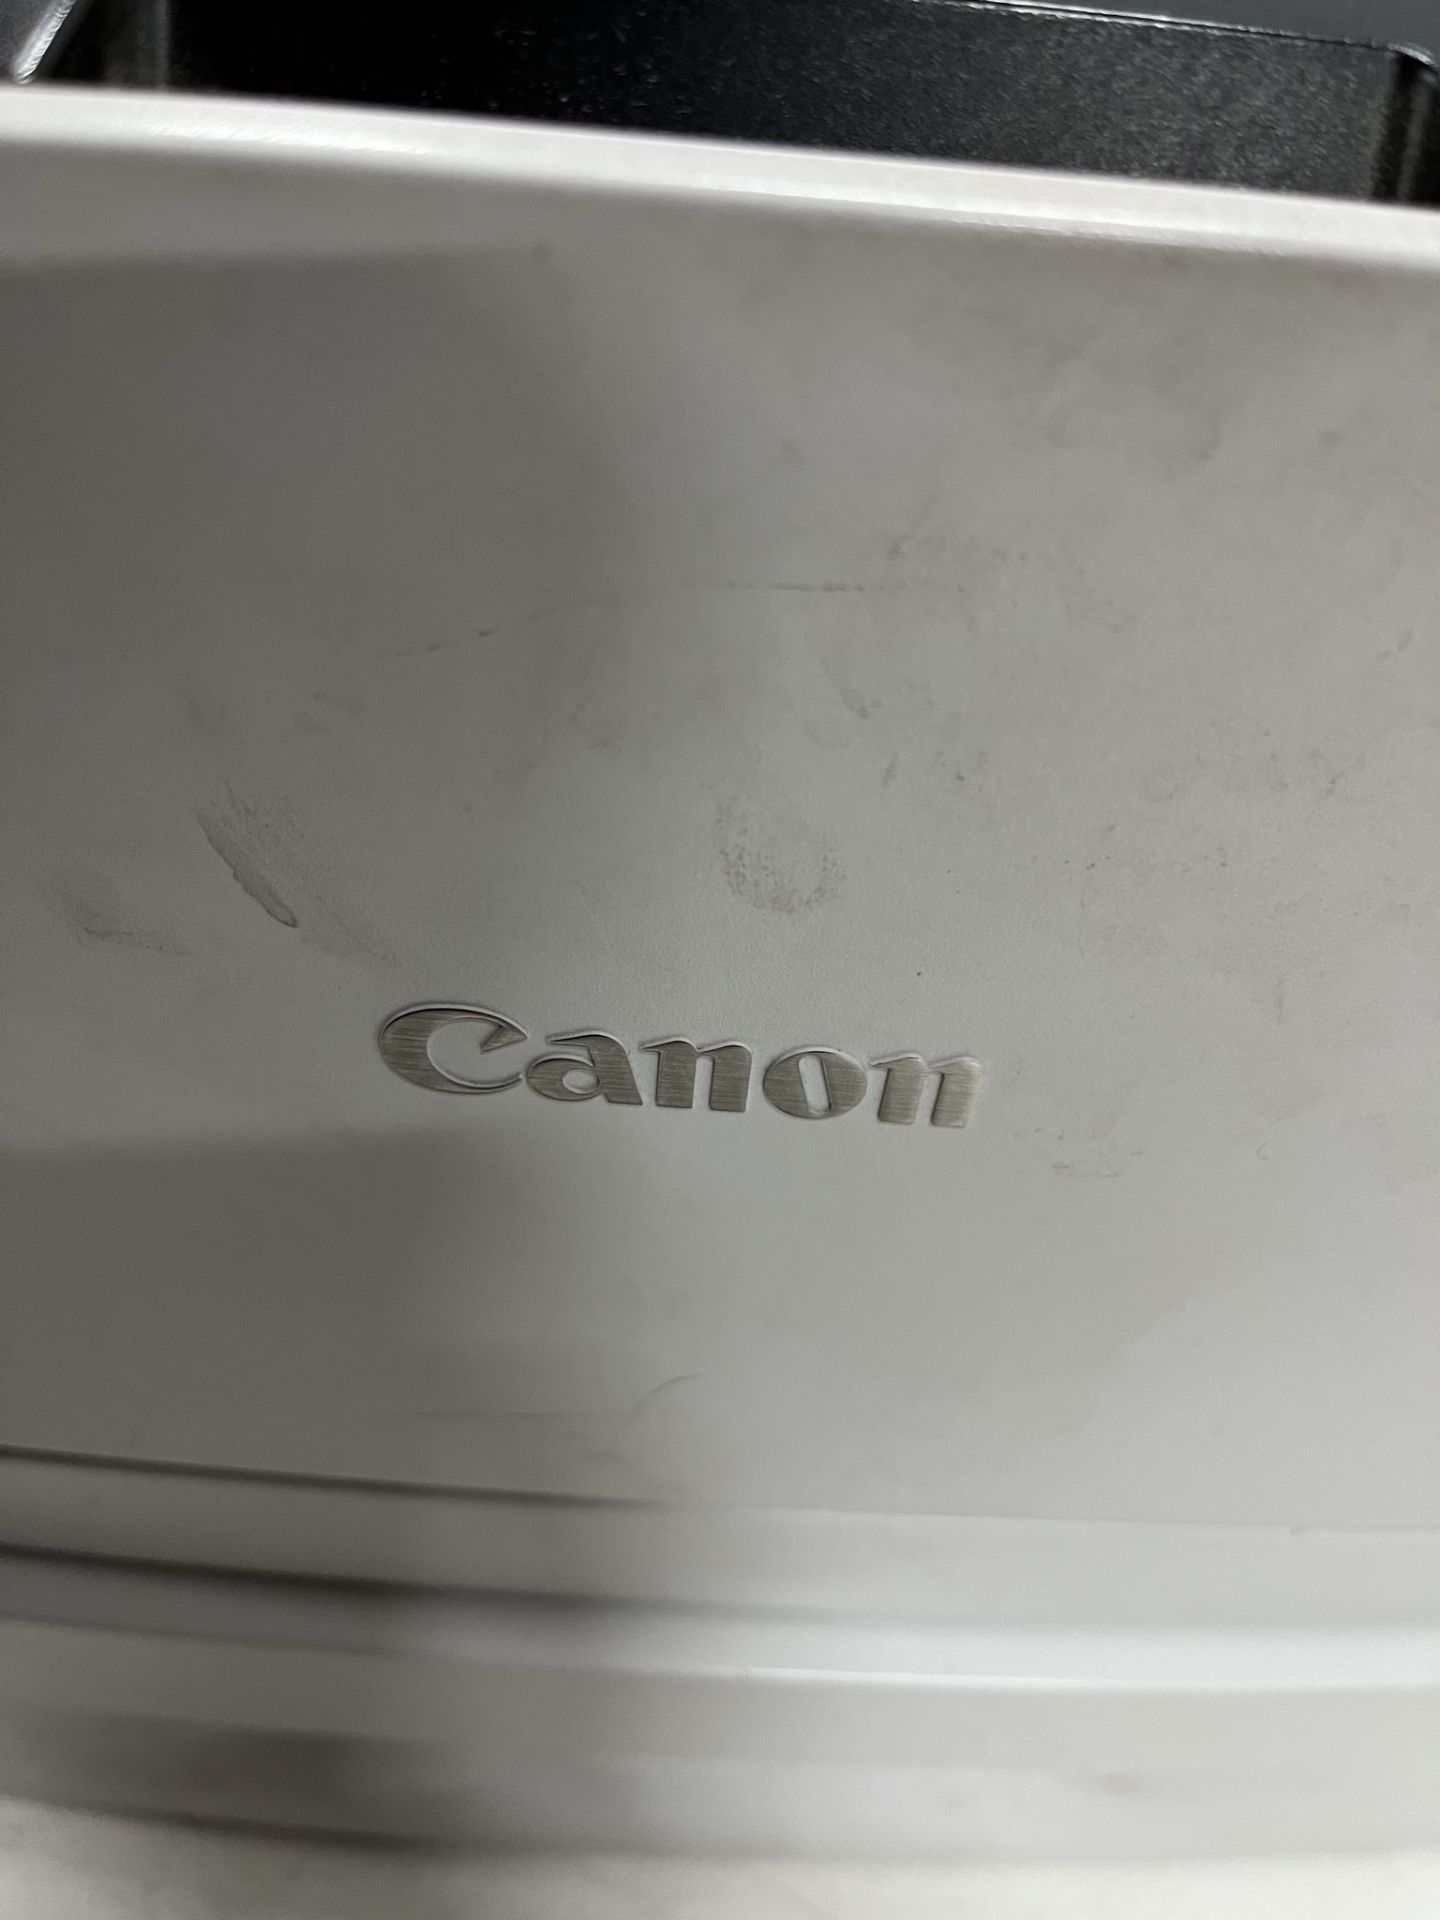 Cannon F161900 Multifunction Printer - Image 7 of 14